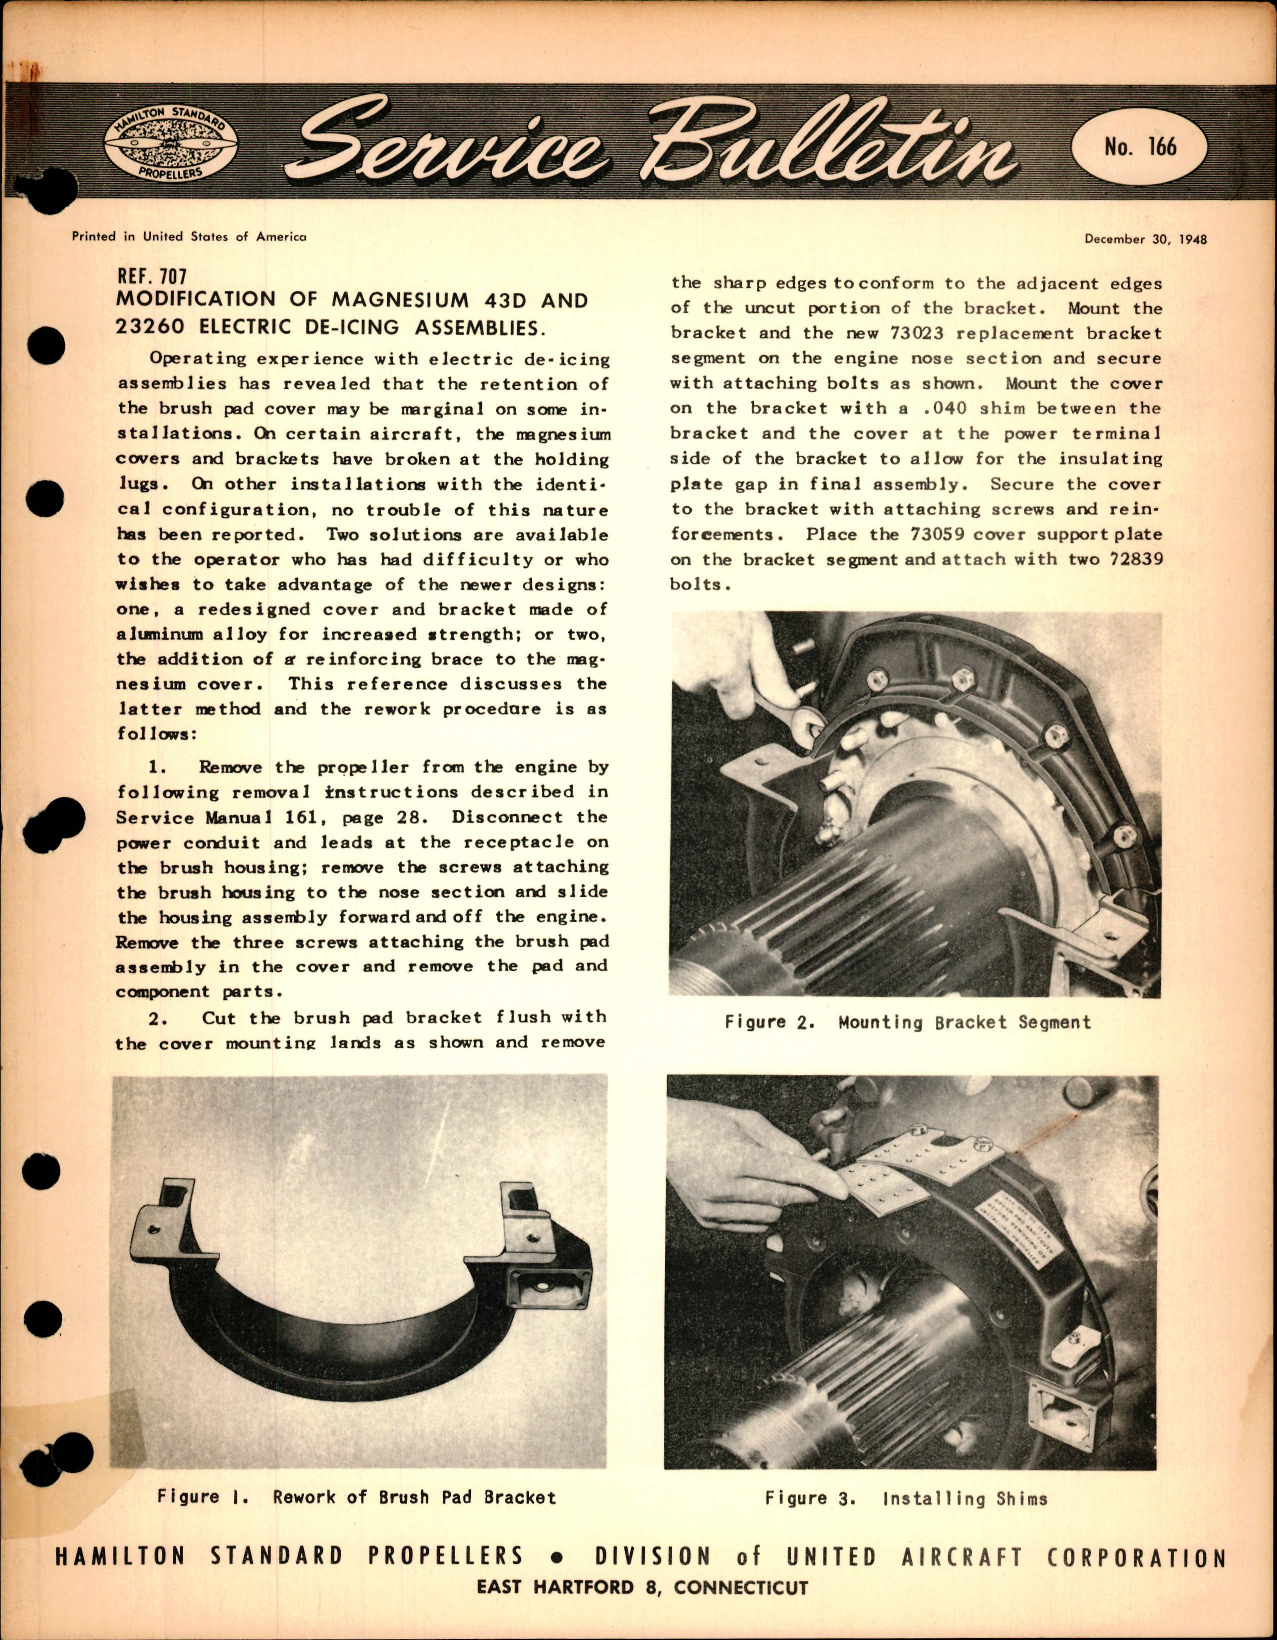 Sample page 1 from AirCorps Library document: Modification of Magnesium 43D and 23260 Electric De-Icing Assemblies, Ref 707